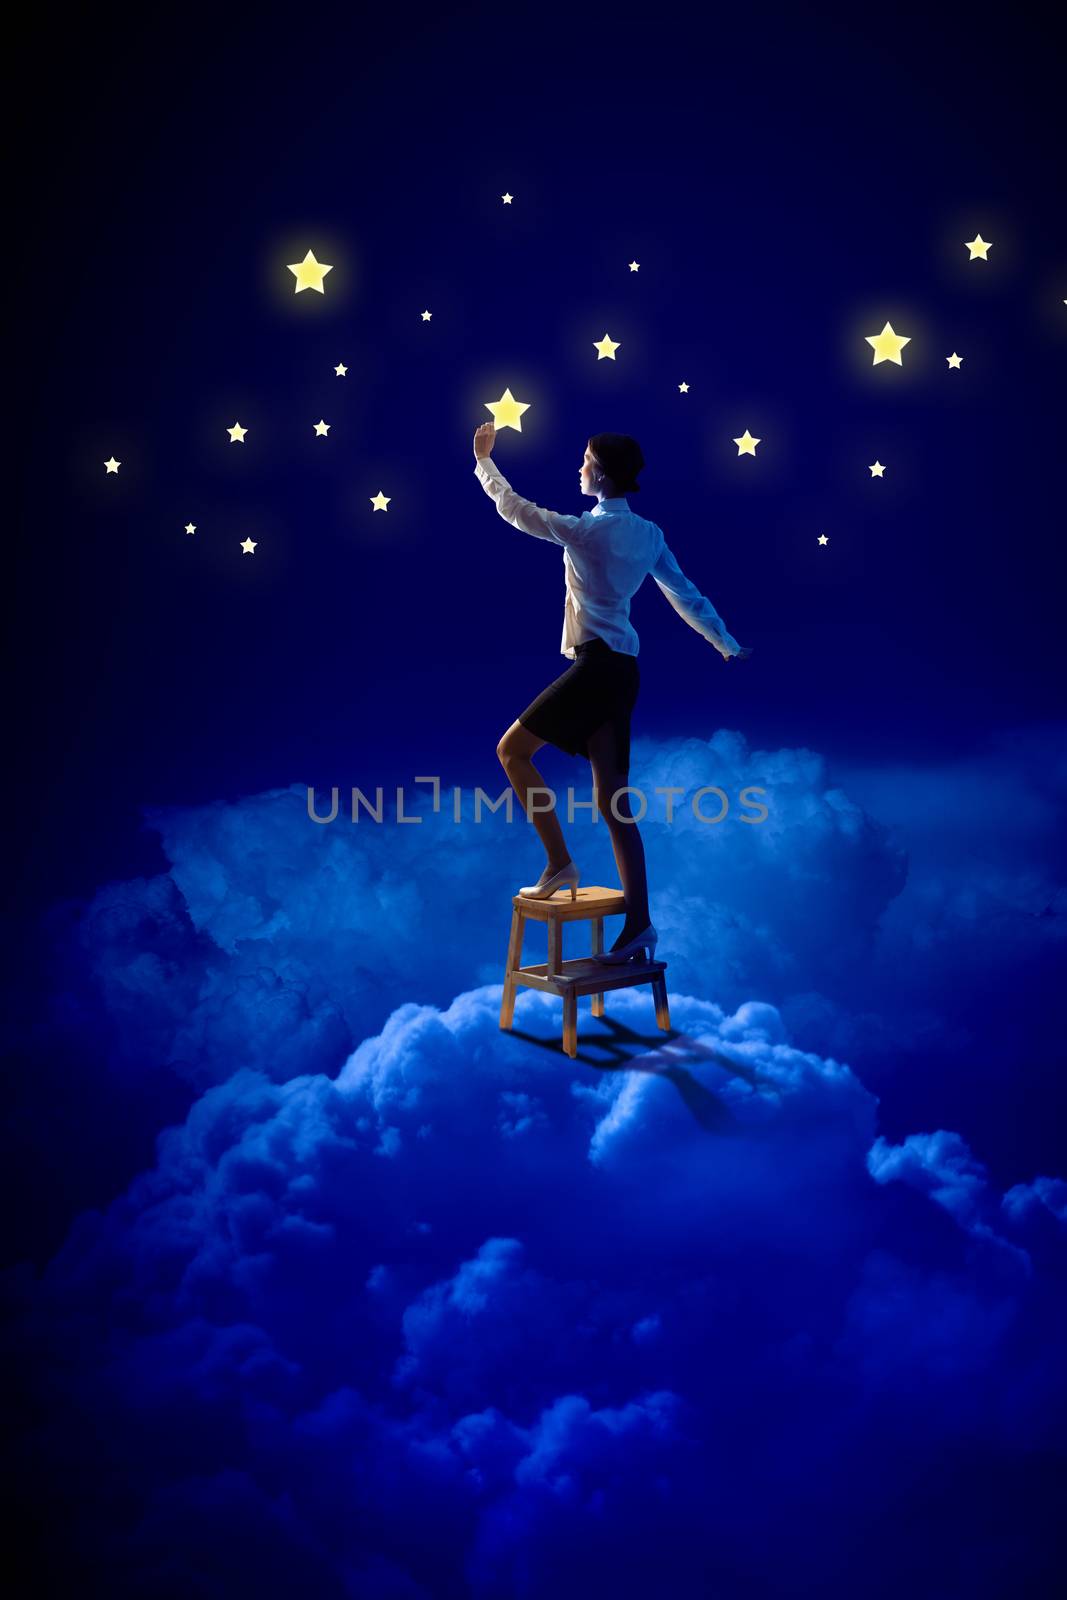 Image of young woman lighting stars in night sky